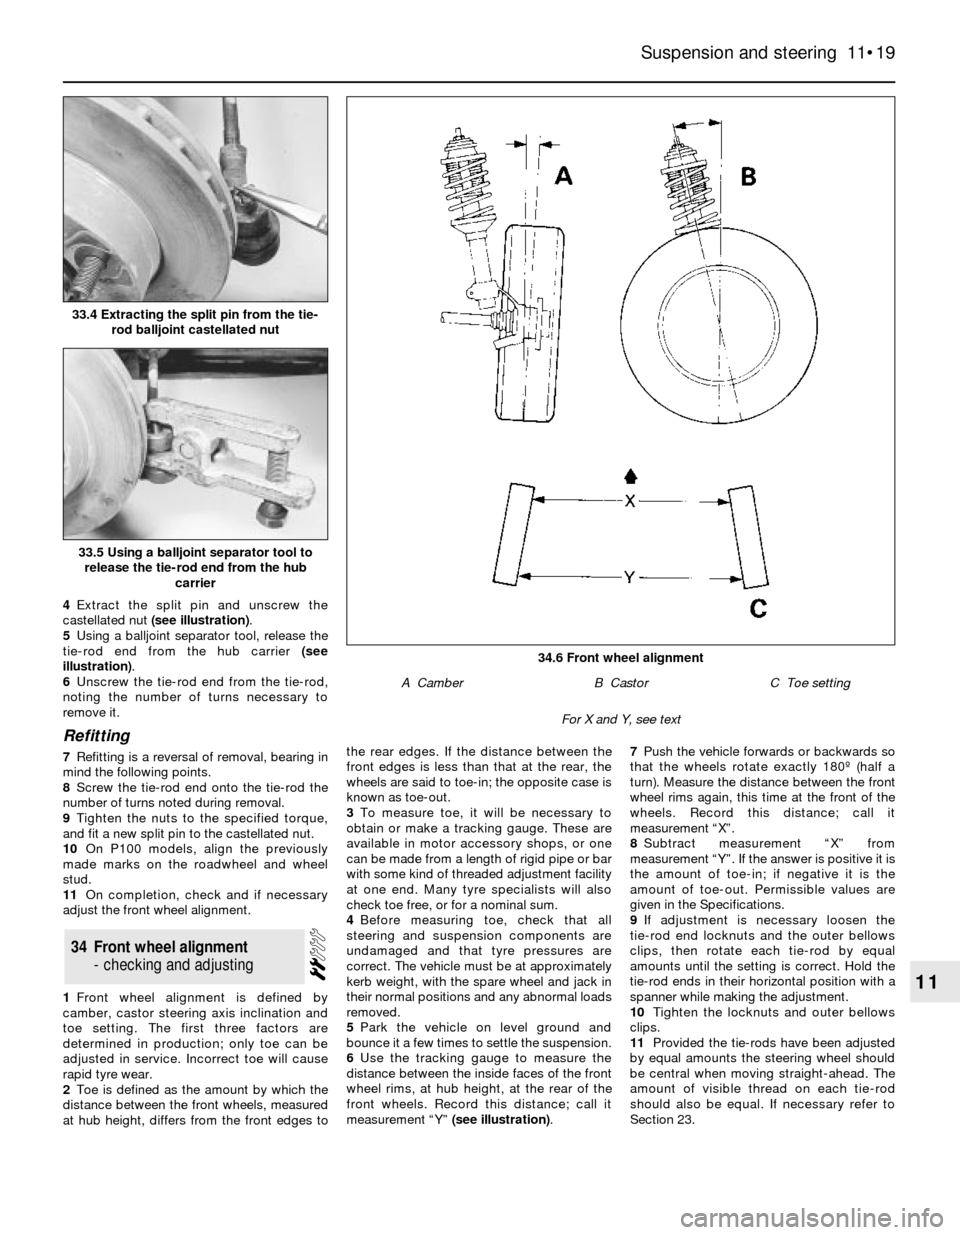 FORD SIERRA 1993 2.G Suspension And Steering Workshop Manual 4Extract the split pin and unscrew the
castellated nut (see illustration).
5Using a balljoint separator tool, release the
tie-rod end from the hub carrier (see
illustration).
6Unscrew the tie-rod end 